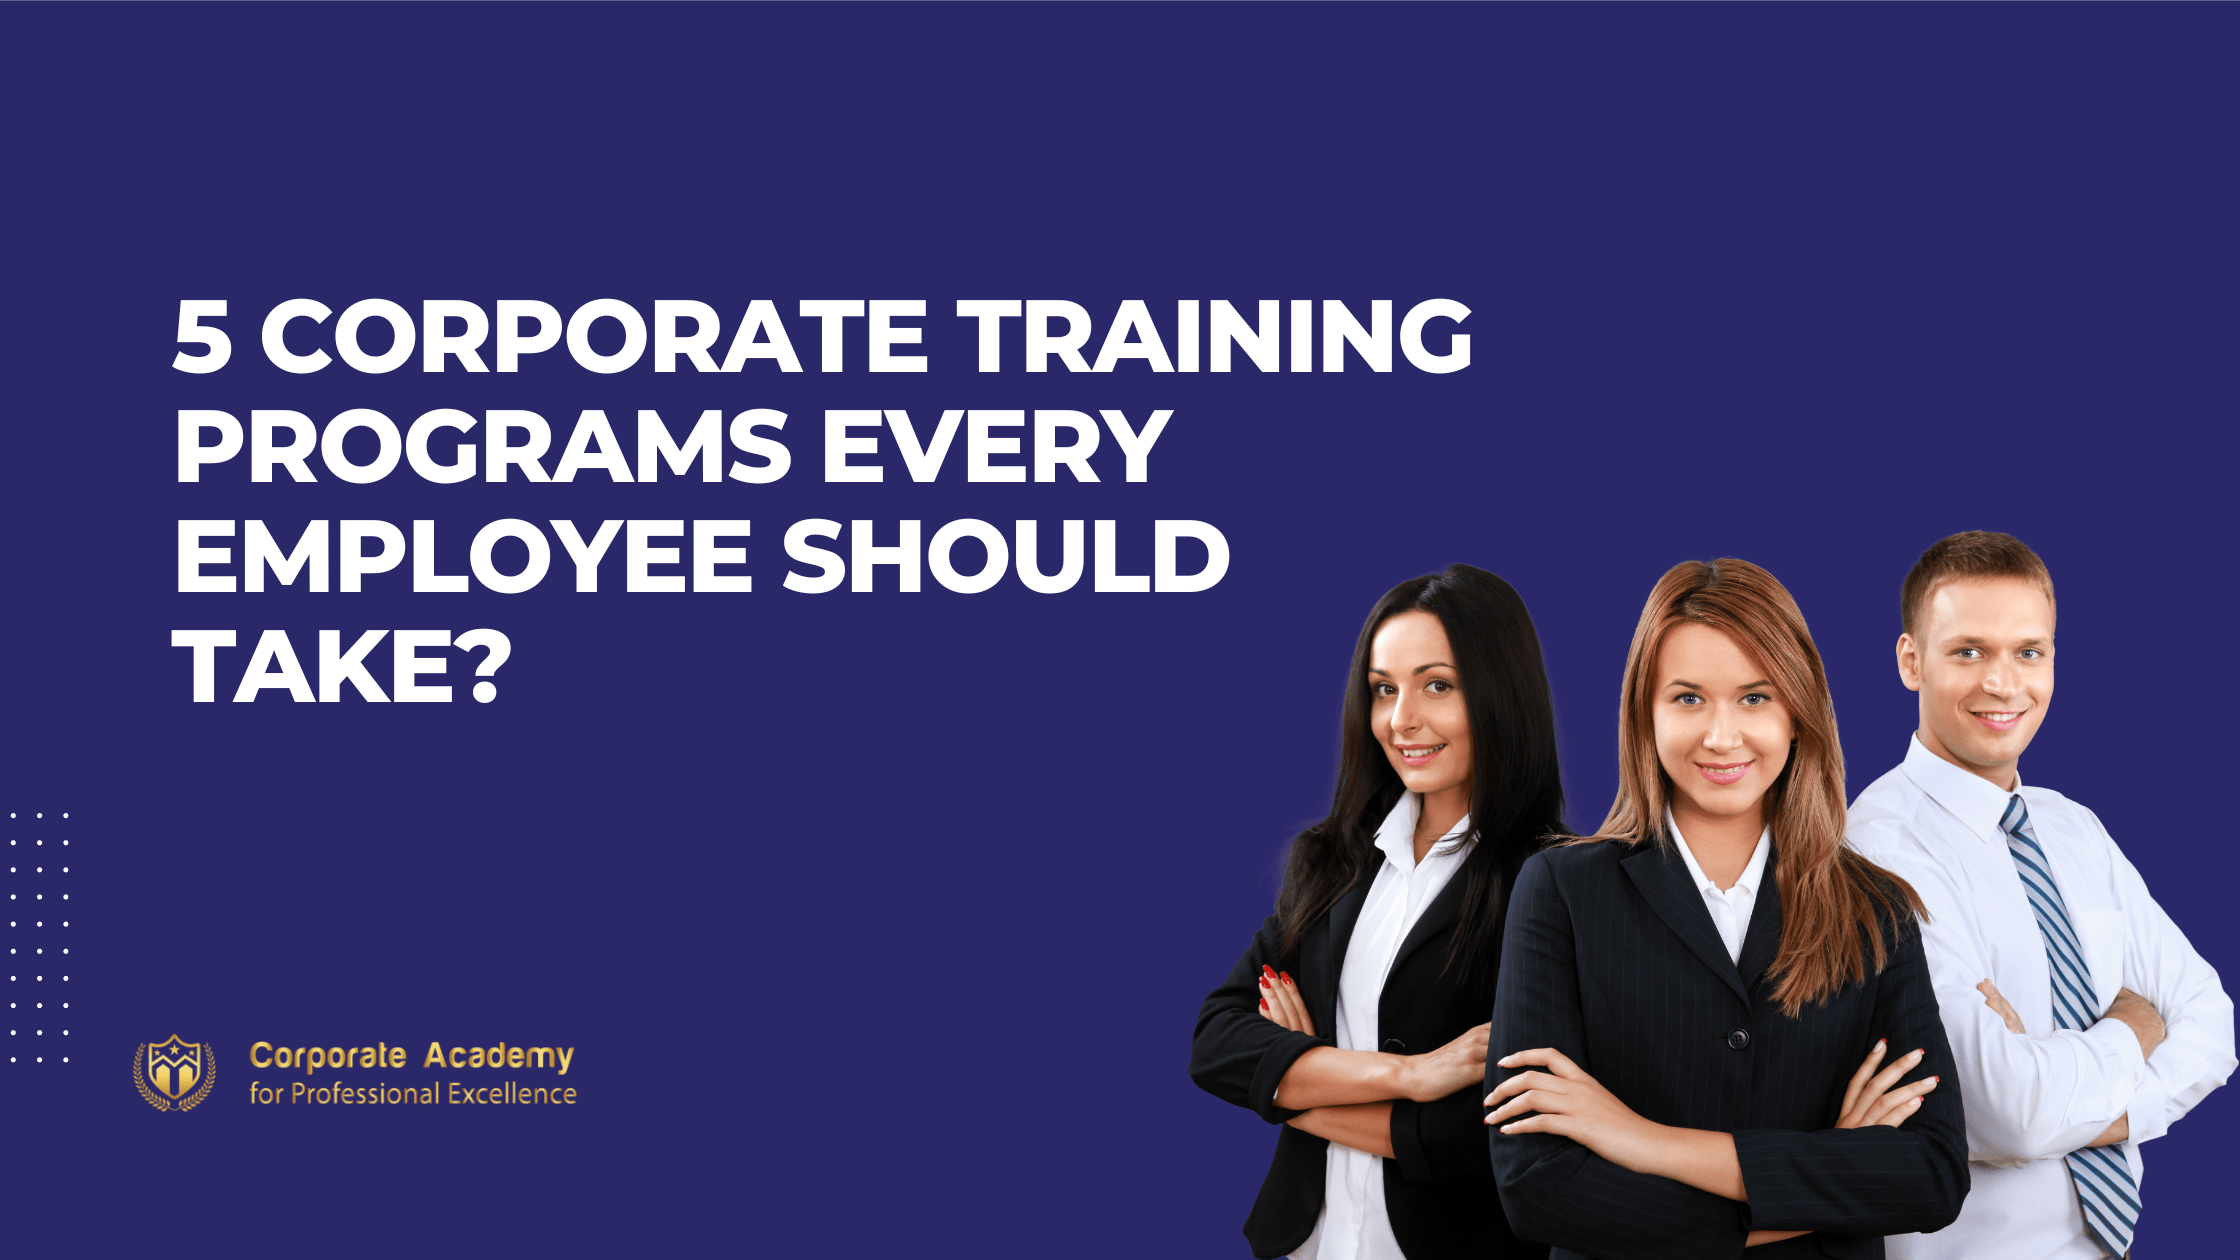 5 Corporate Training Programs Every Employee Should Take?